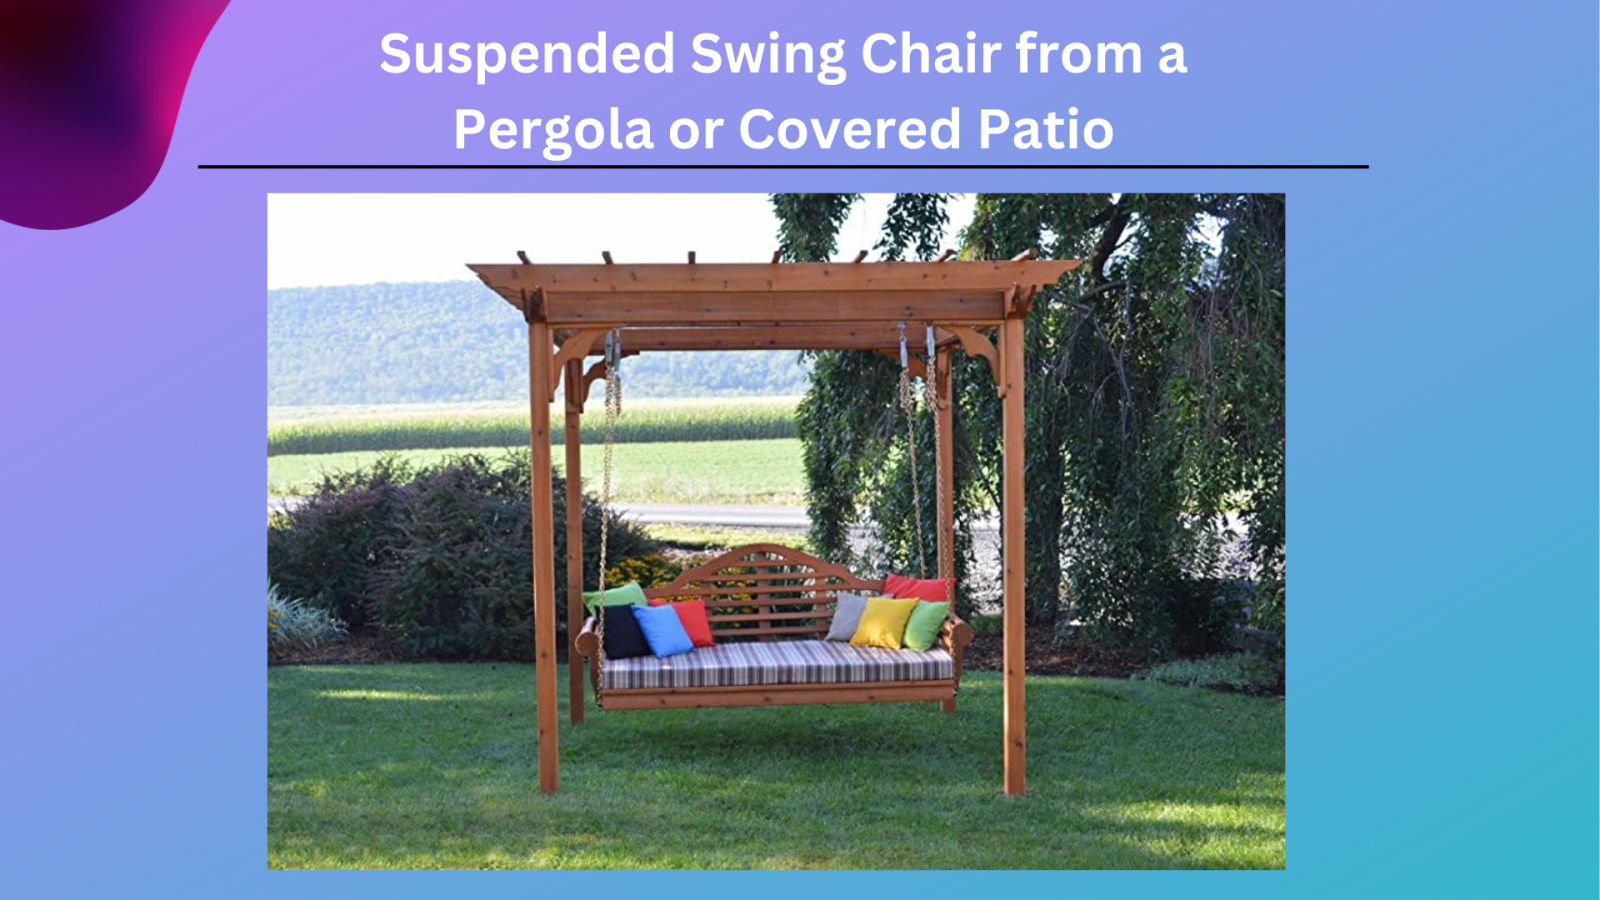 Swing Chair from a Pergola or Covered Patio